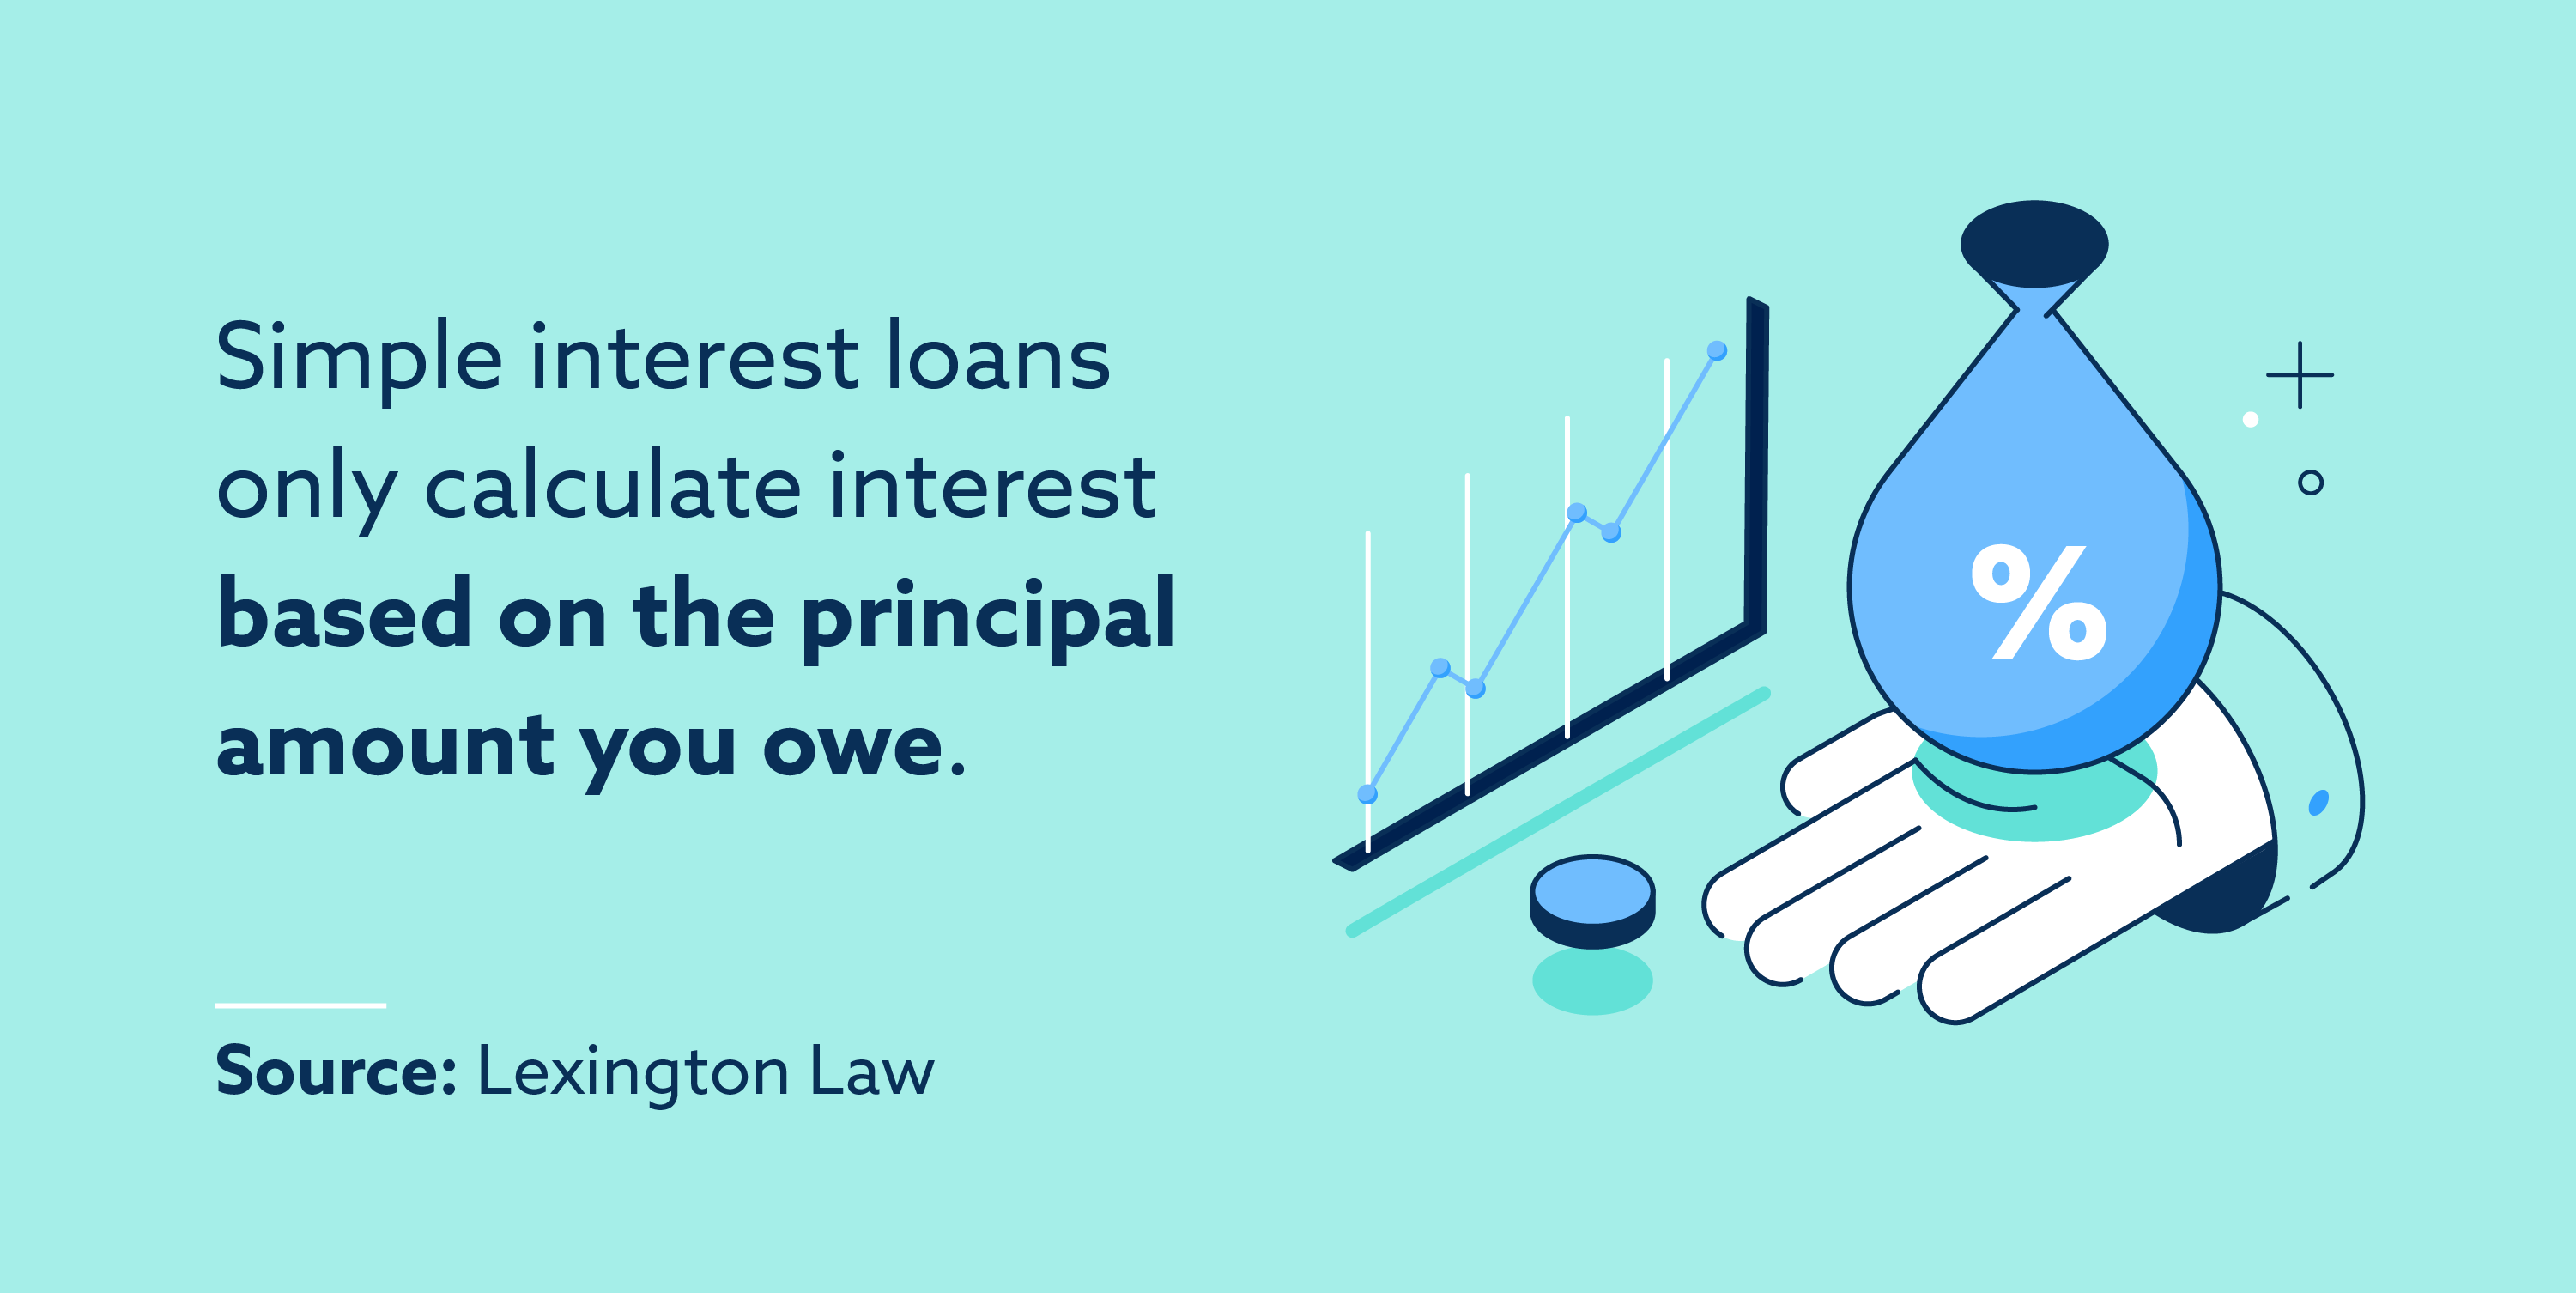 Simple interest loans only calculate interest based on the principal amount you owe.